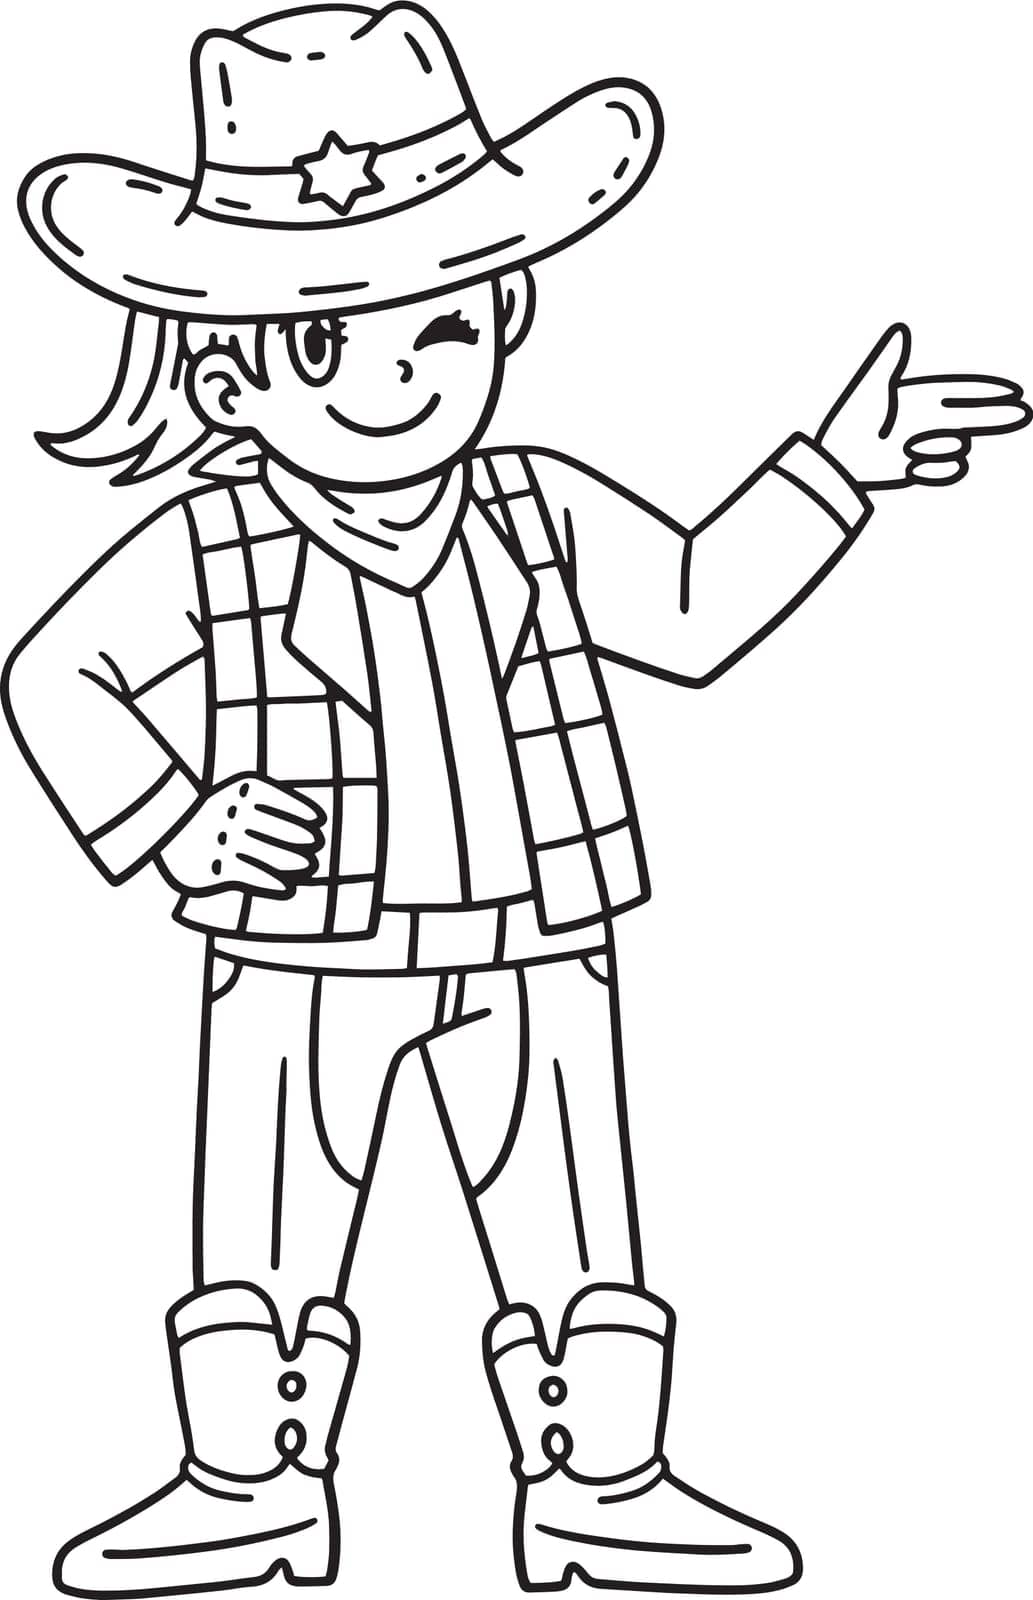 A cute and funny coloring page of a Cowgirl with the Gun Gesture. Provides hours of coloring fun for children. To color, this page is very easy. Suitable for little kids and toddlers.